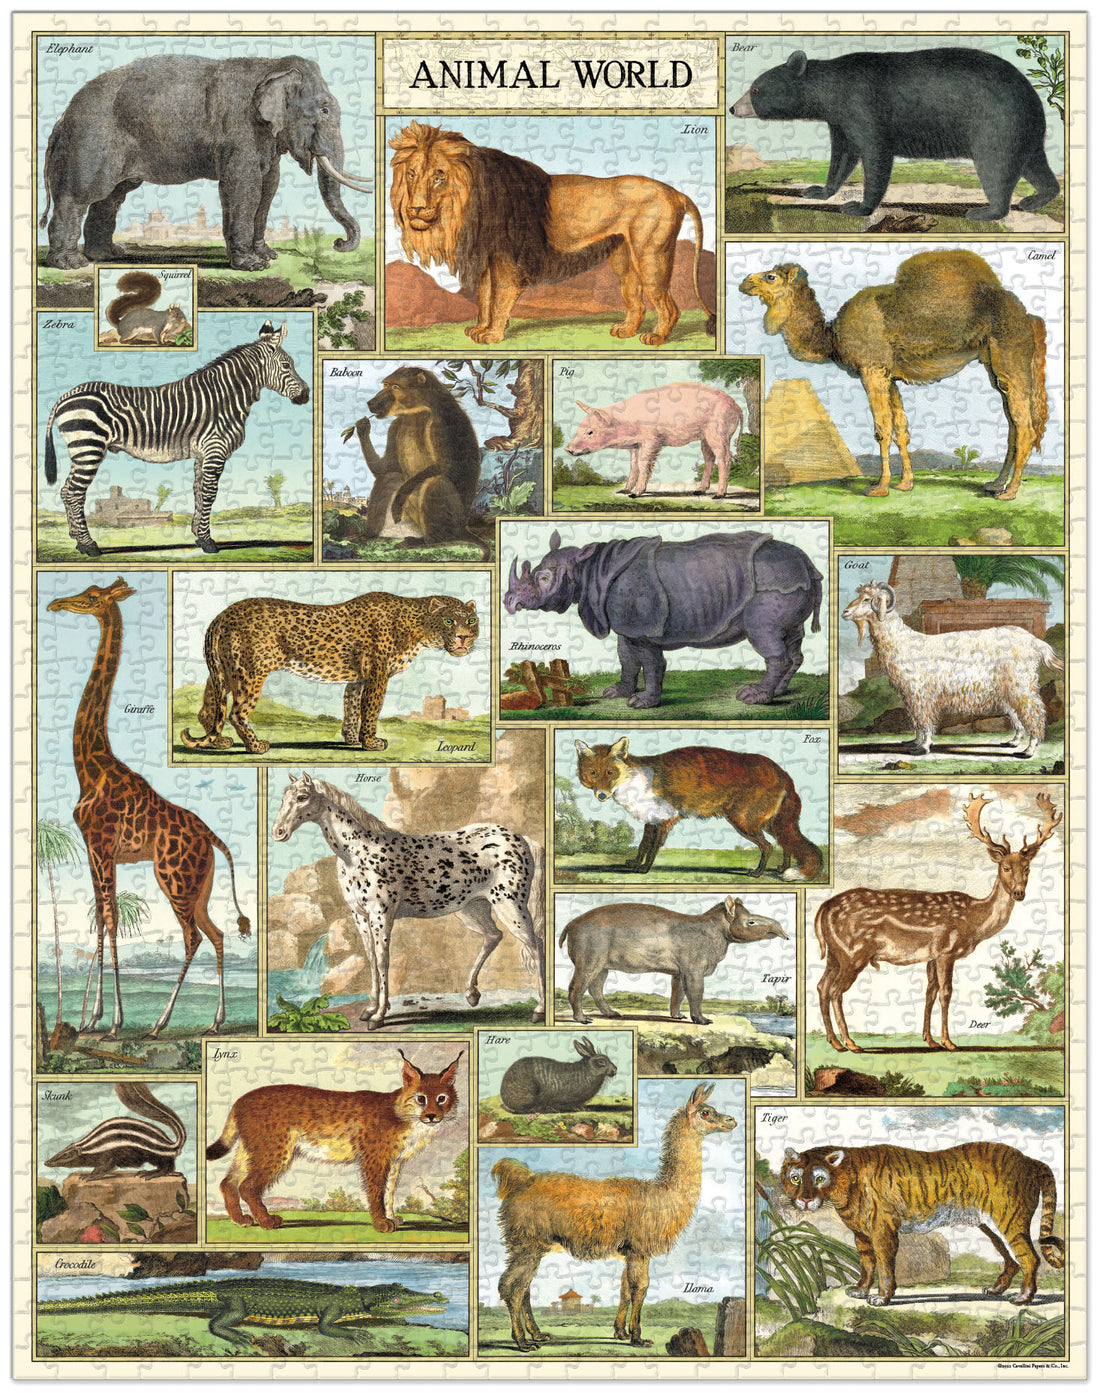 A cylindrical puzzle box with a vintage design, labeled &quot;Cavallini Papers &amp; Co Animal World Puzzle,&quot; featuring illustrated images of various animals.